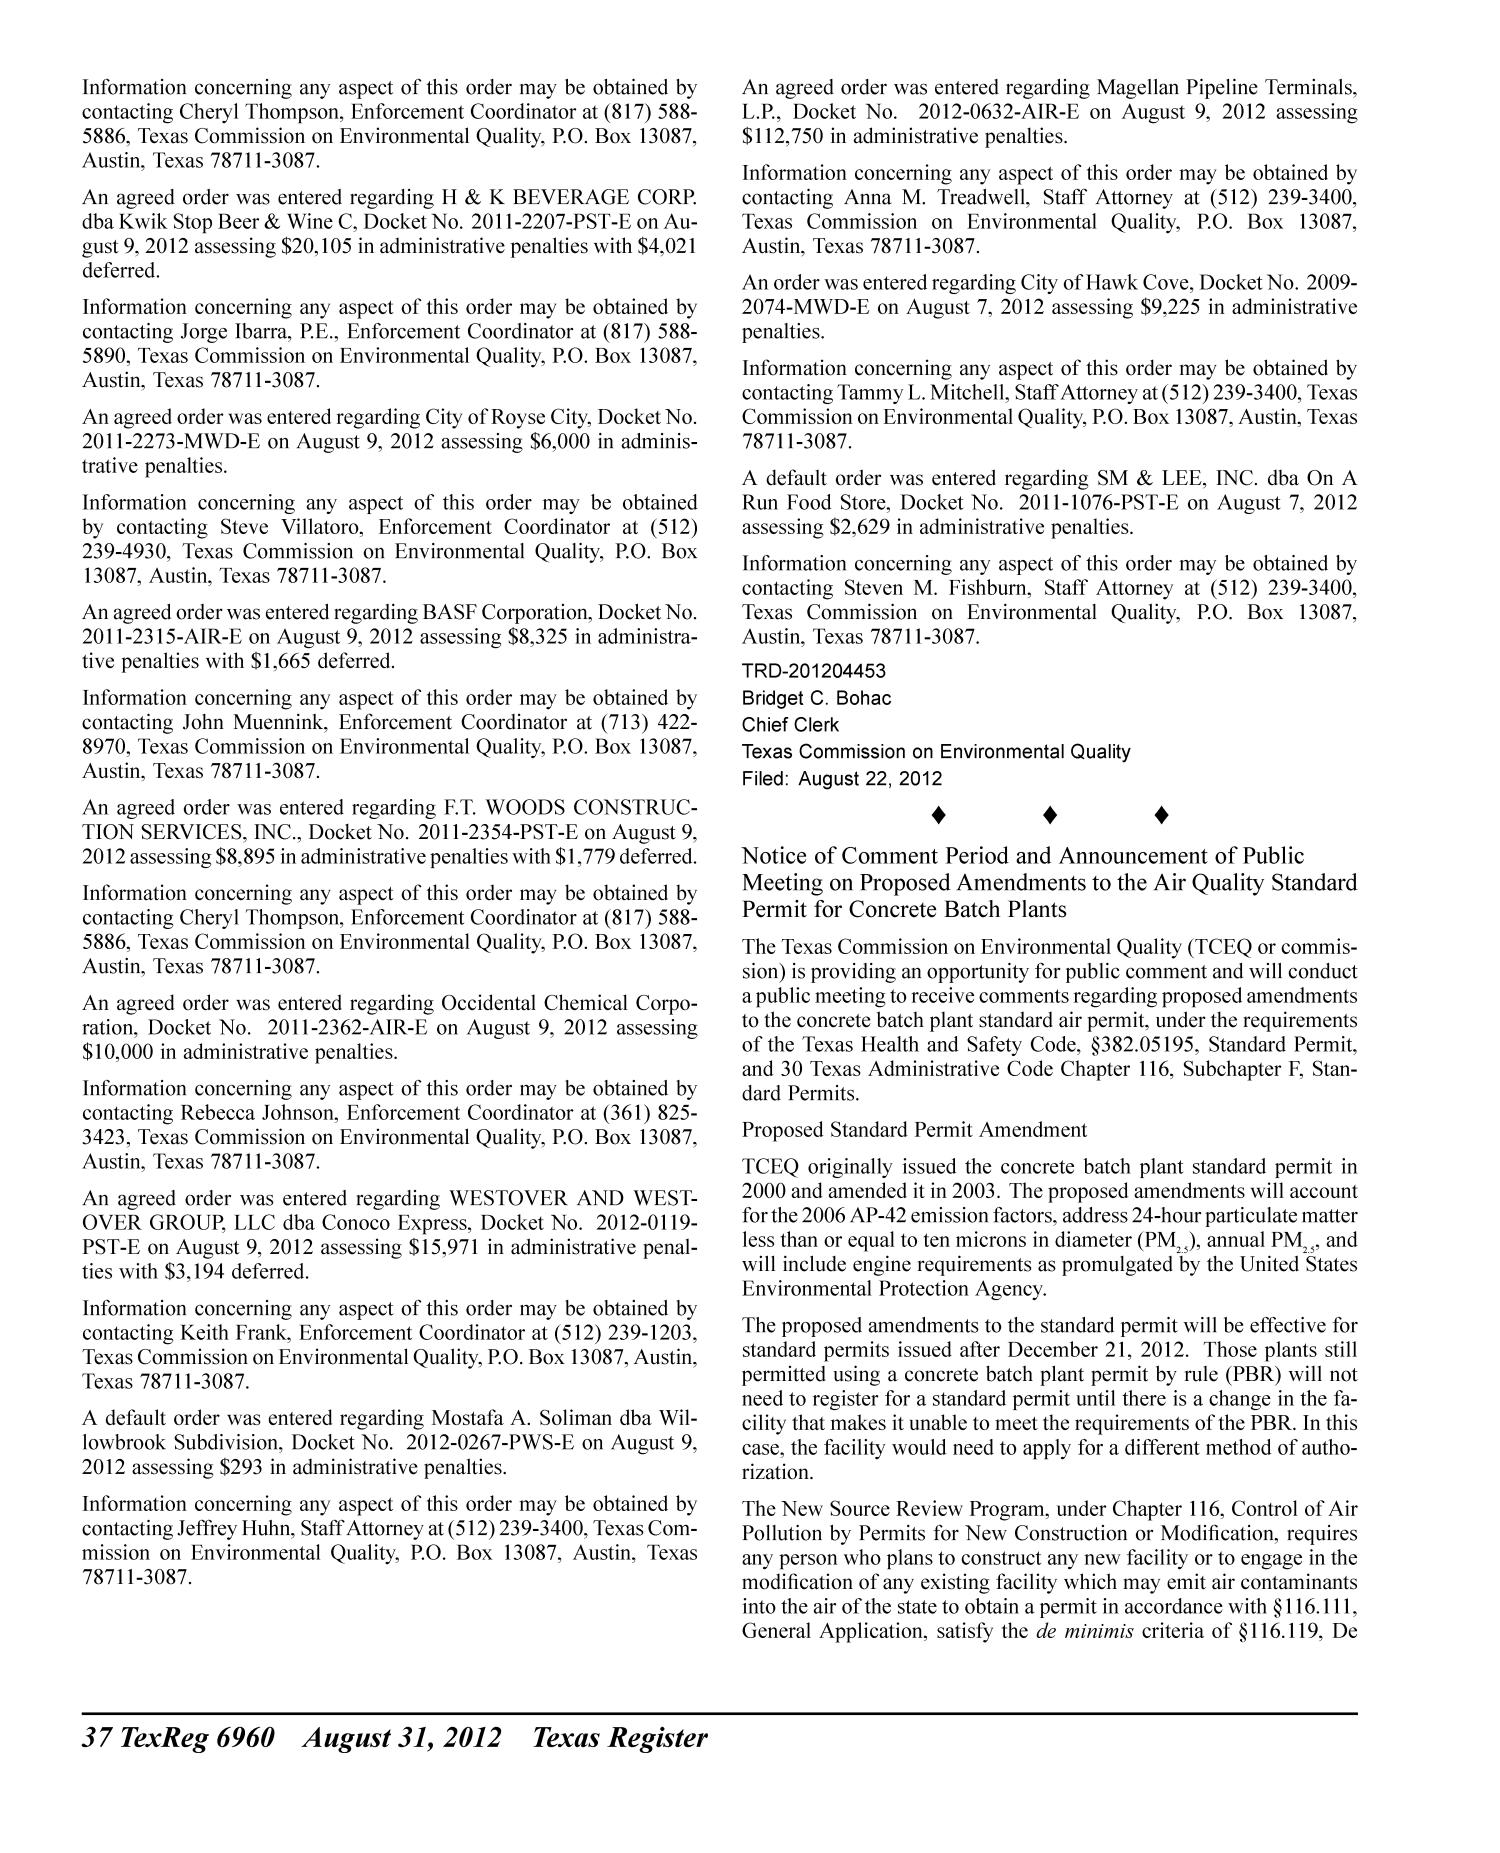 Texas Register, Volume 37, Number 35, Pages 6819-7008, August 31, 2012
                                                
                                                    6960
                                                